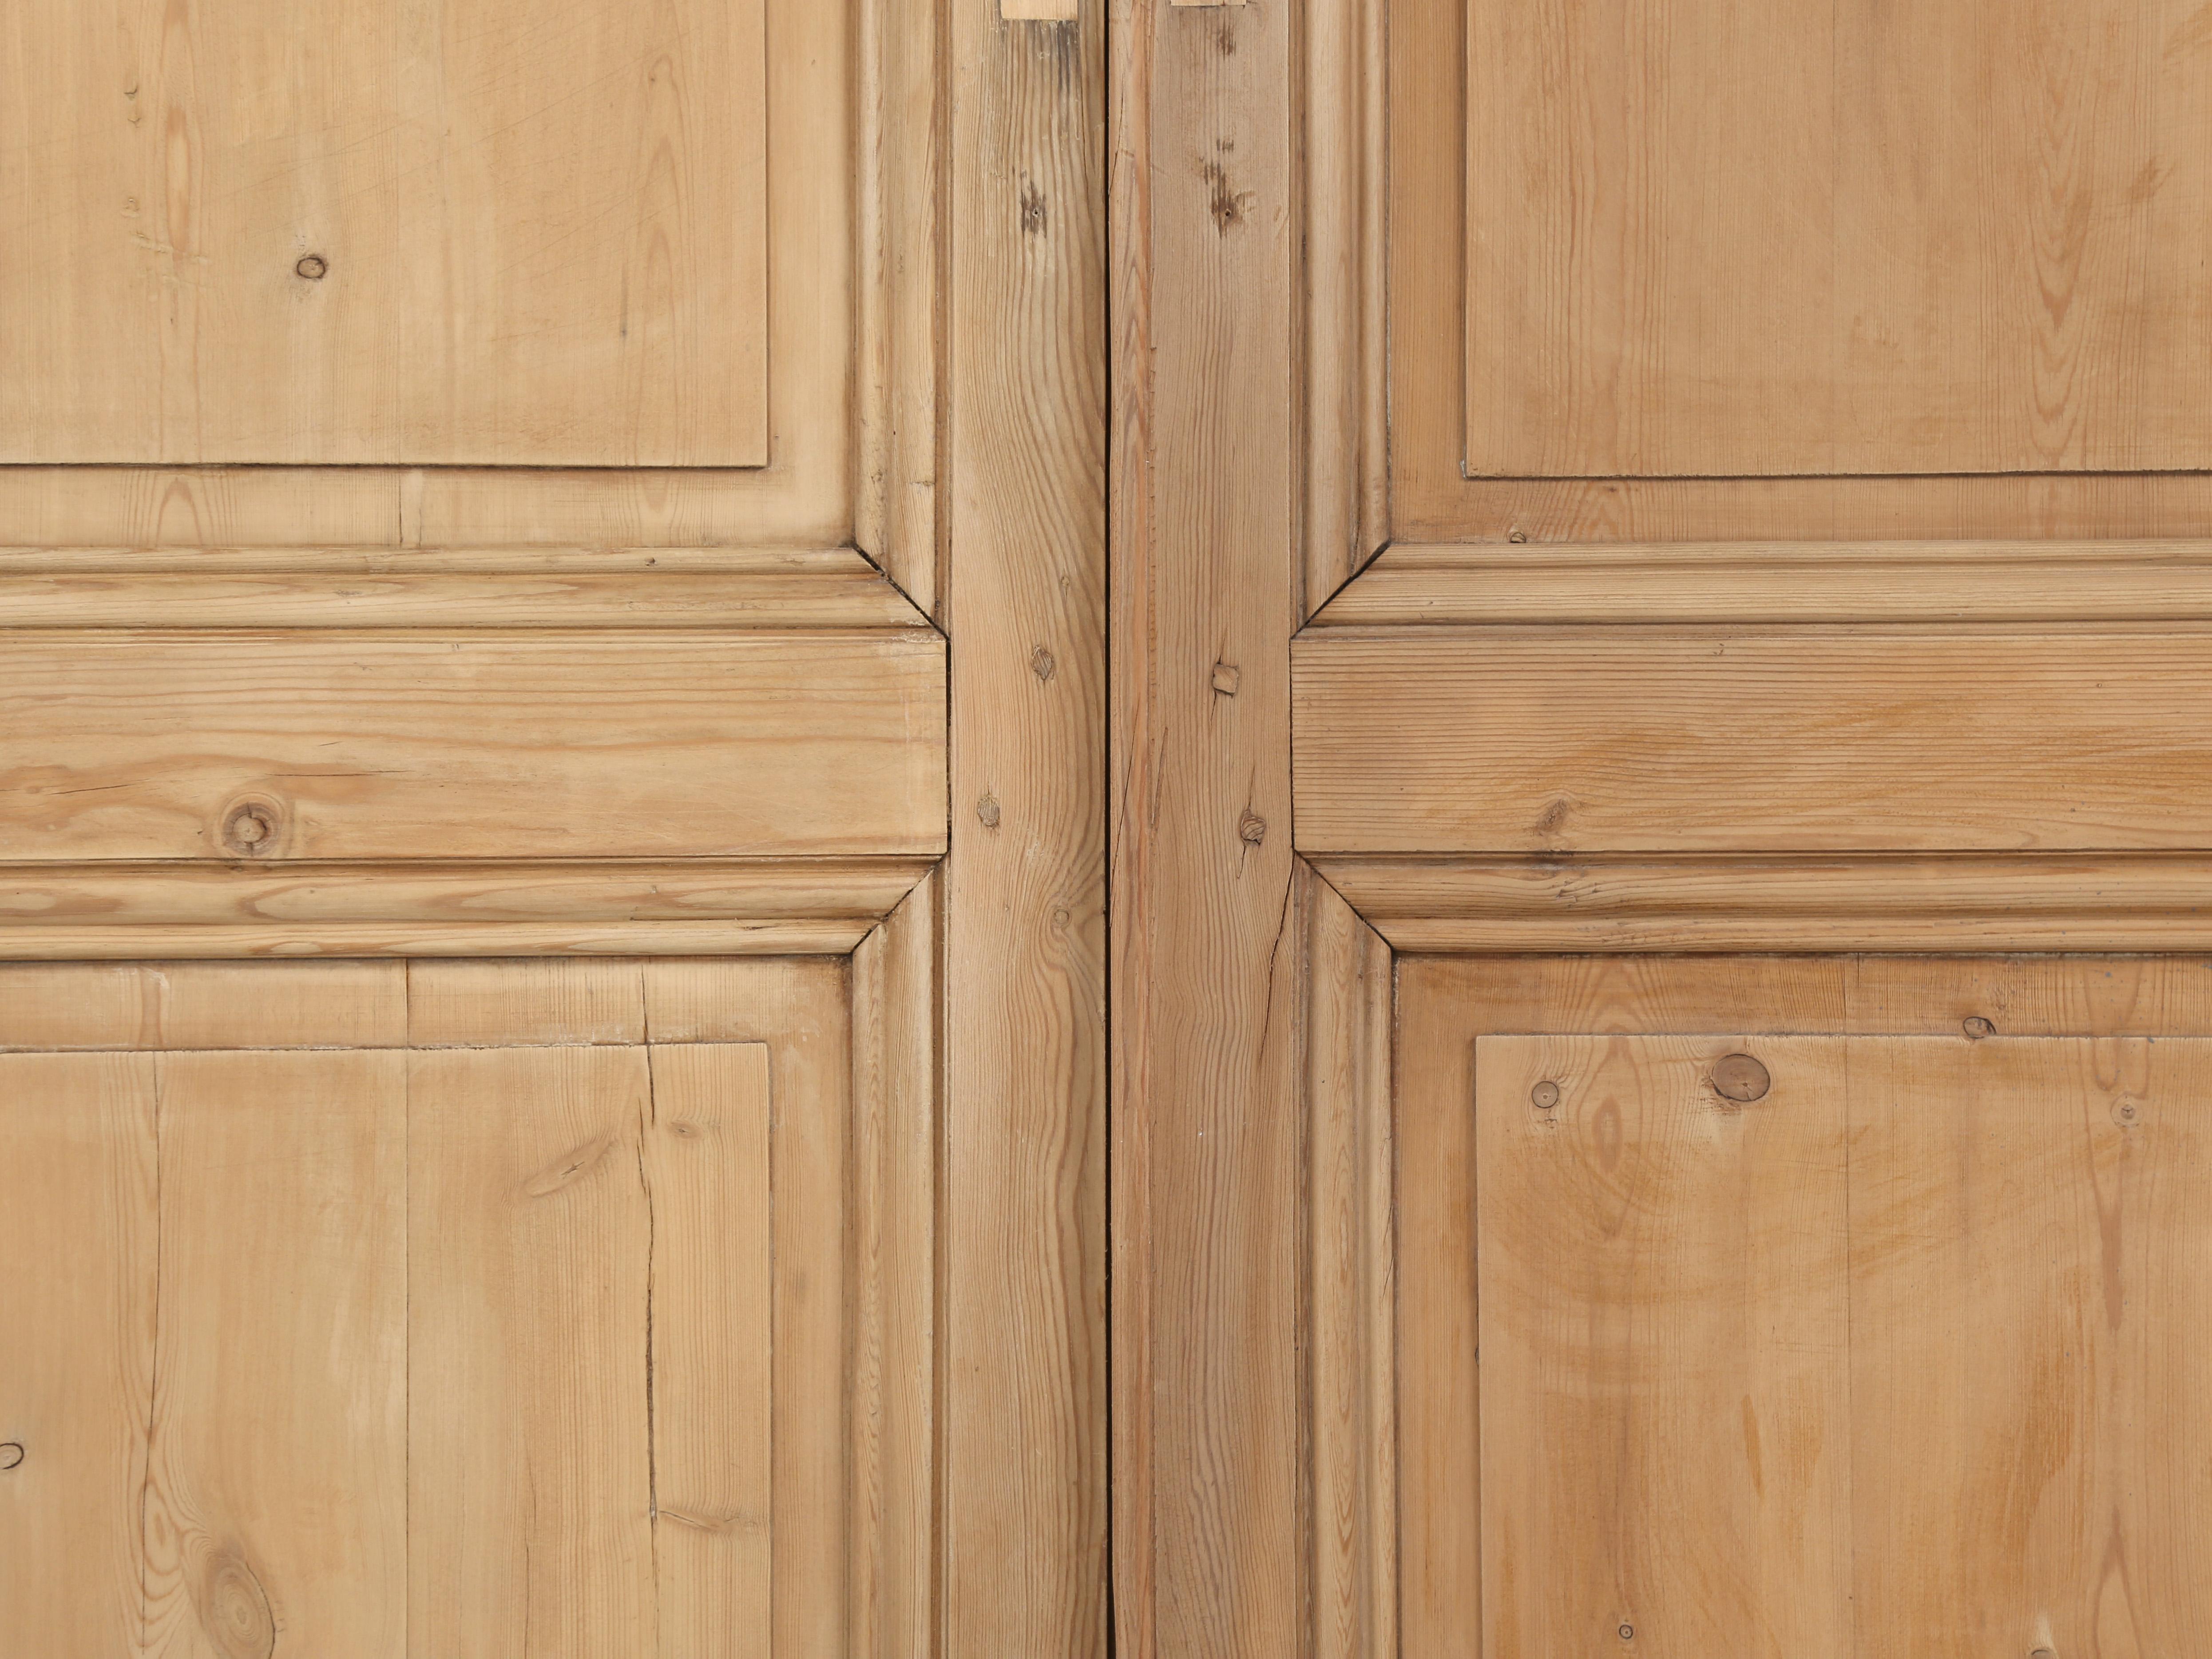 Late 19th Century Antique '2' Pairs of French Doors From Toulouse Region Stripped to Raw Wood